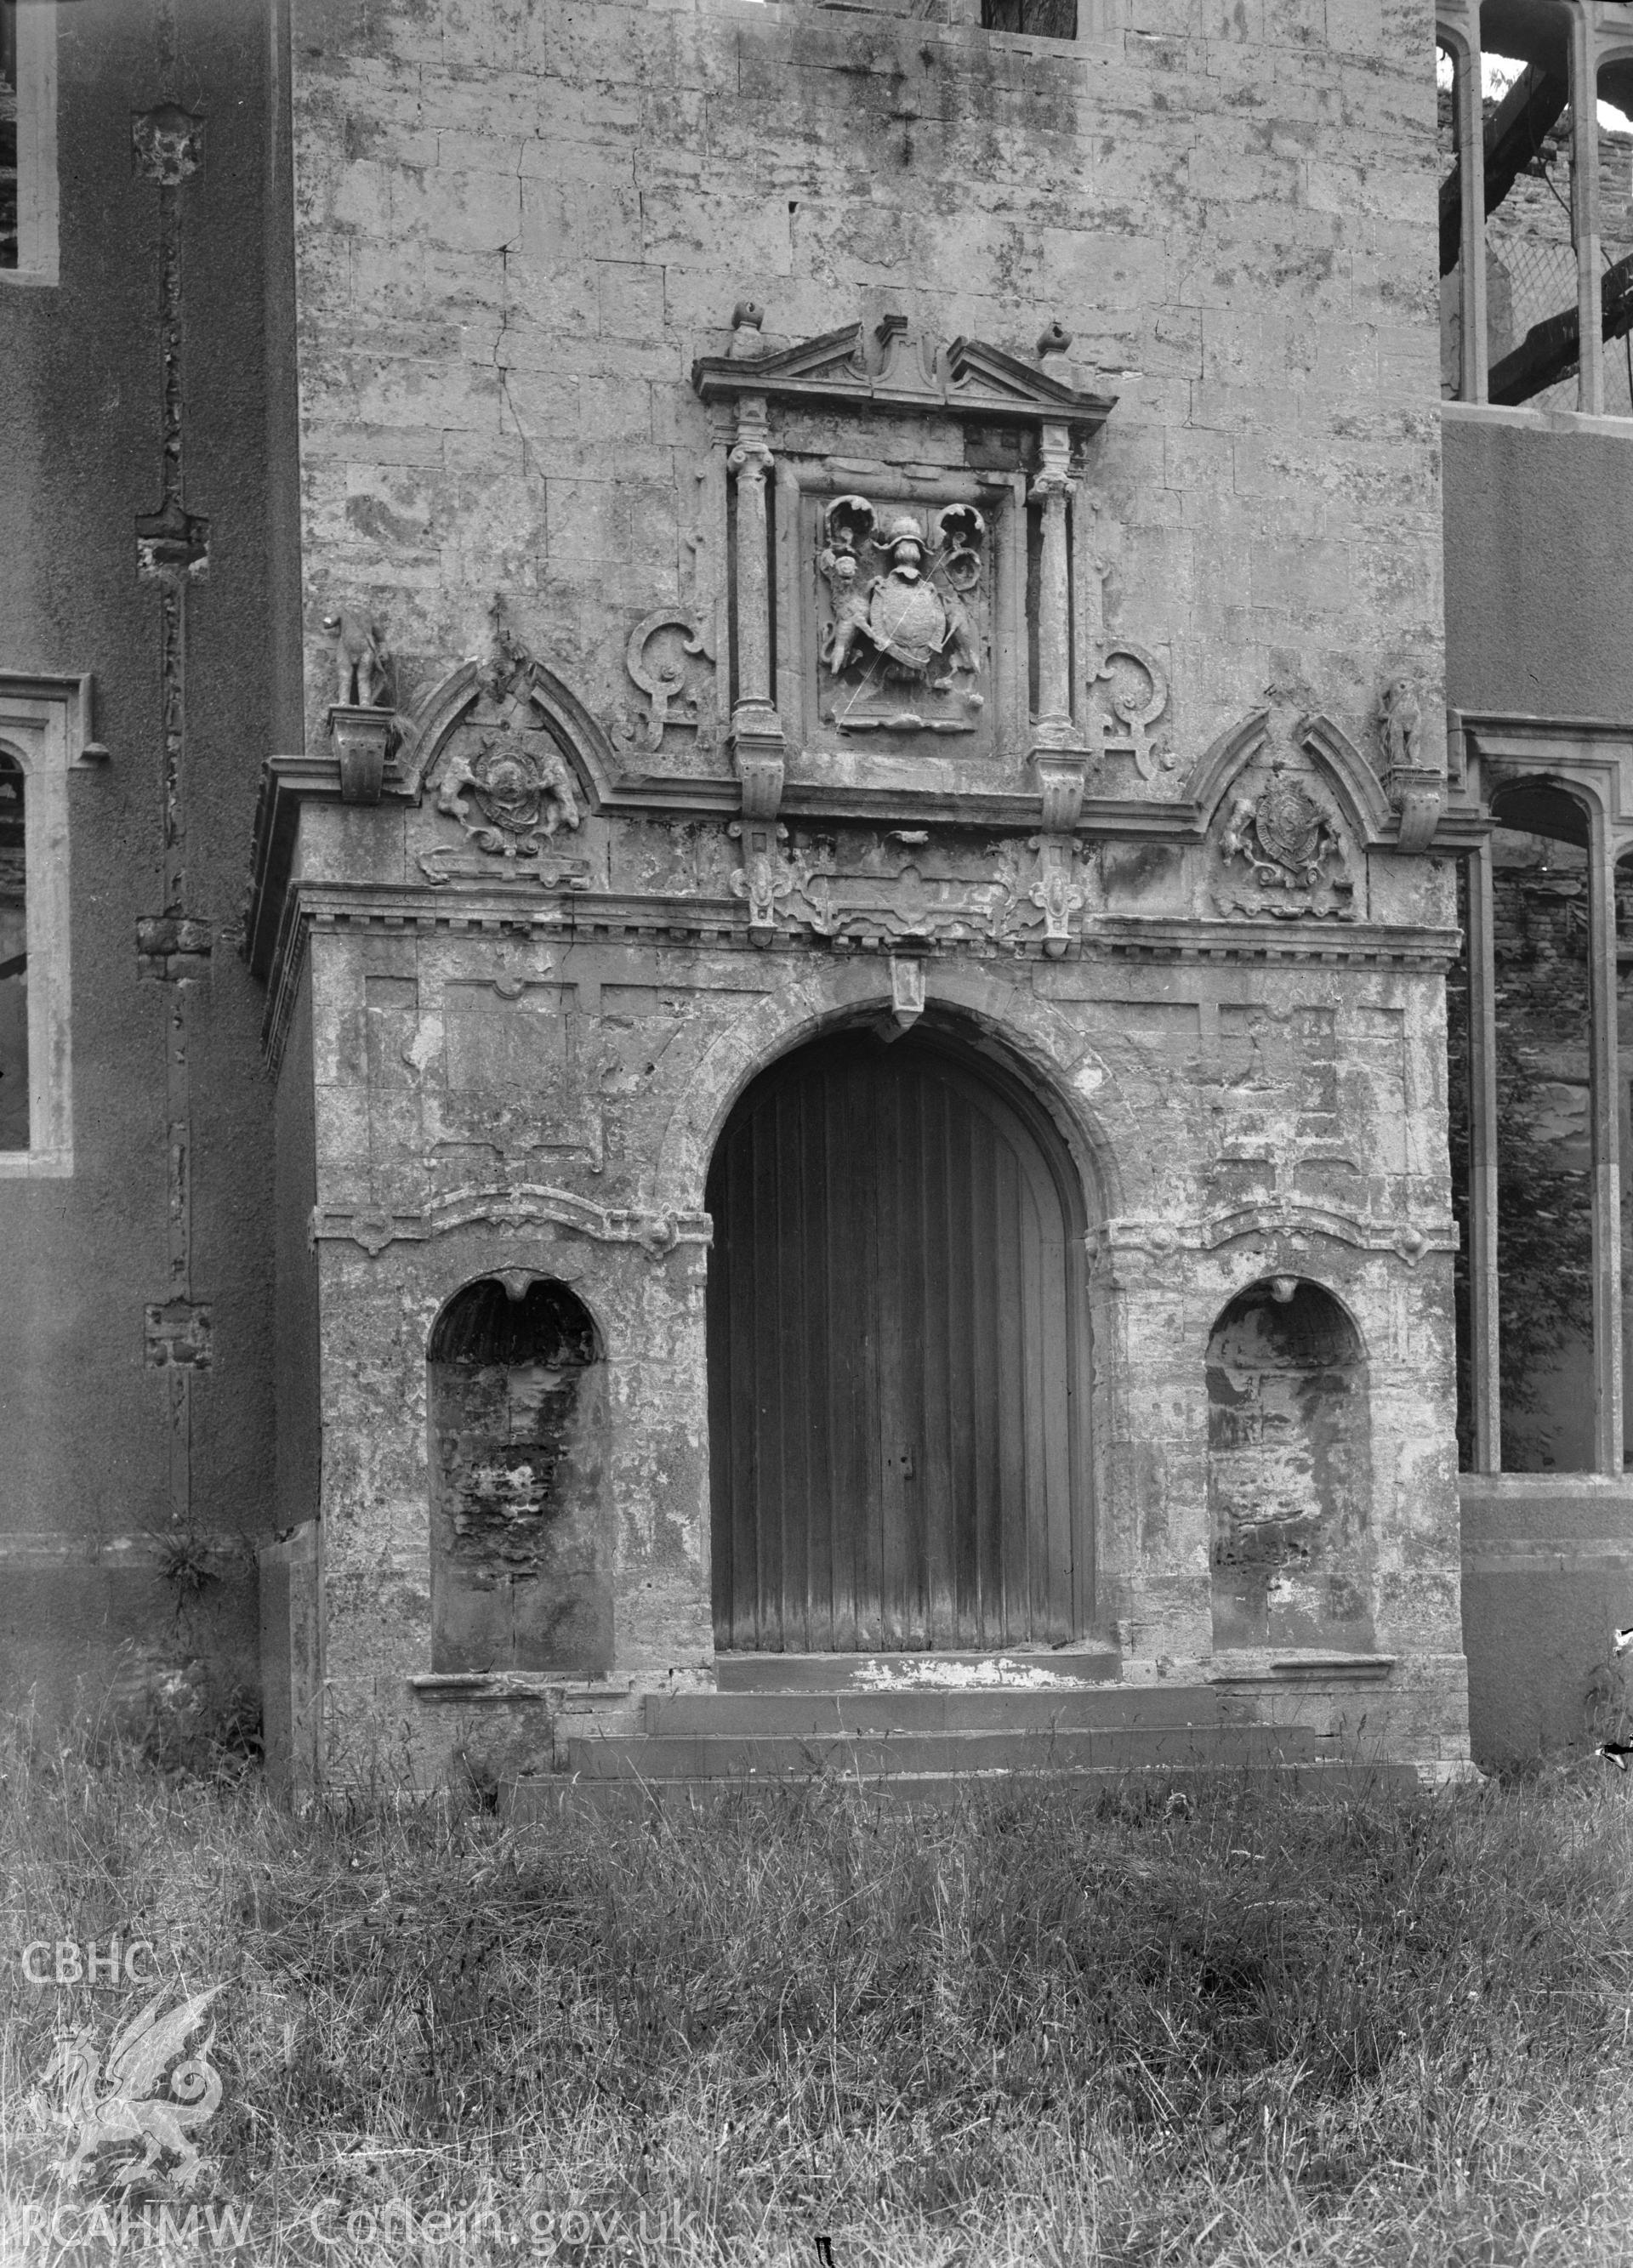 View of the front porch of Ruperra Castle from the south east, taken in 1962.